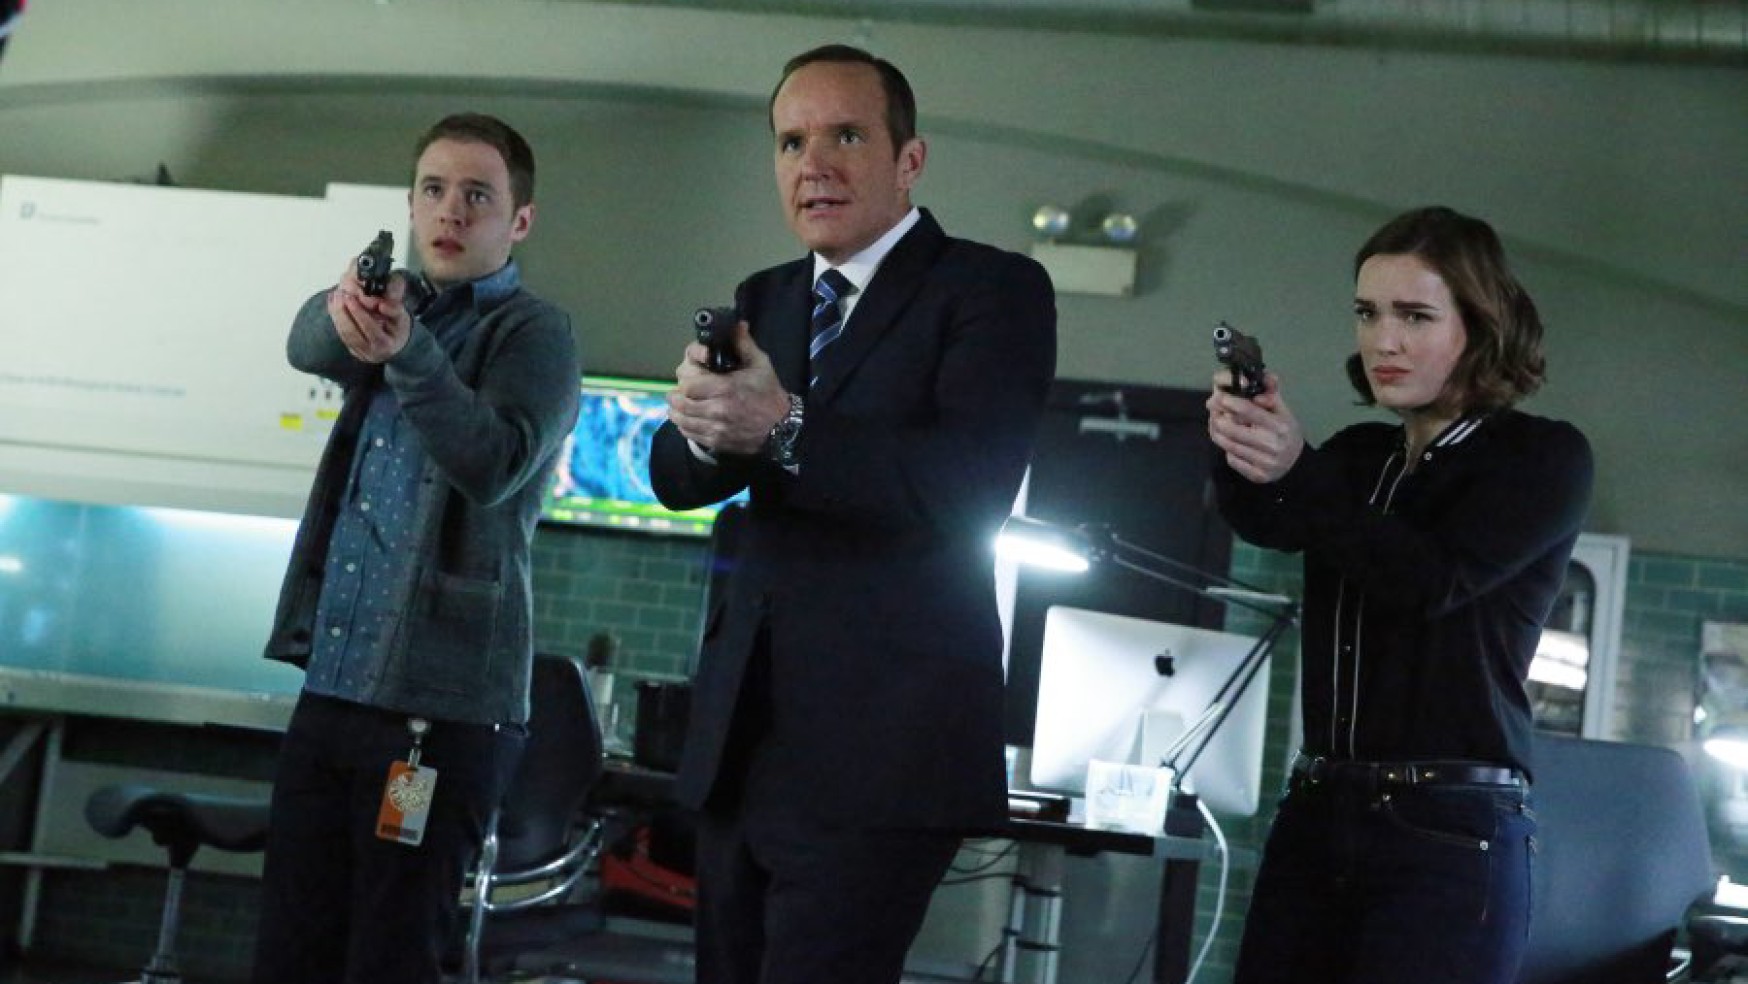 S.O.S. Part 1 / 2: Marvel’s Agents of SHIELD S2E21/22 – Review